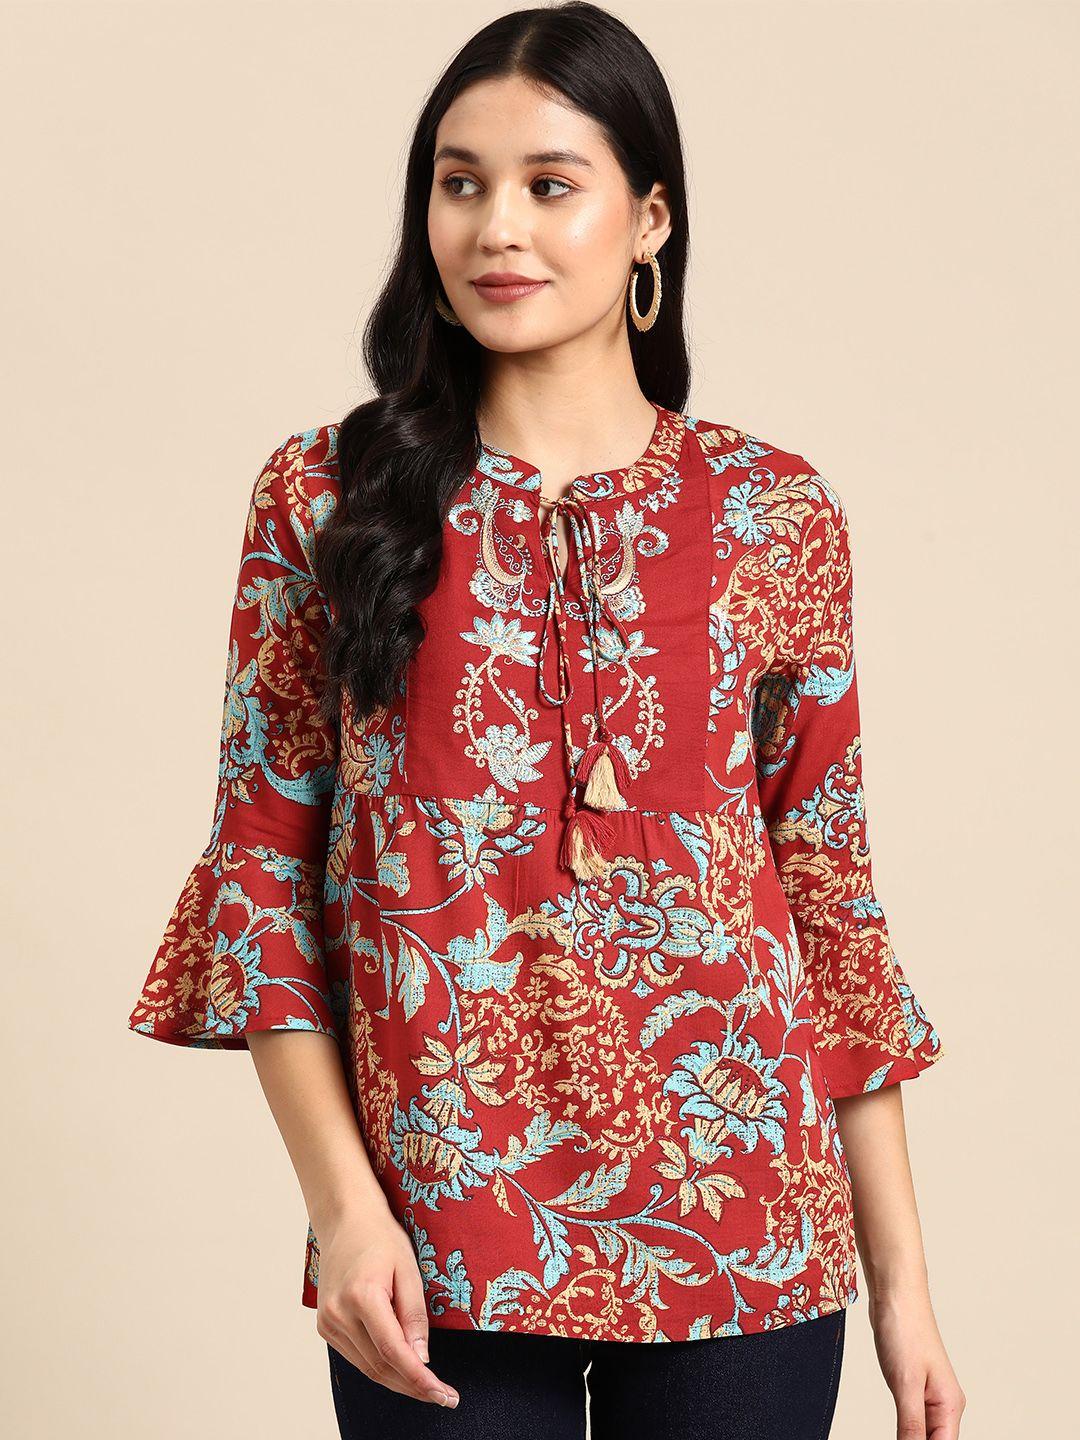 all about you ethnic motifs printed kurti